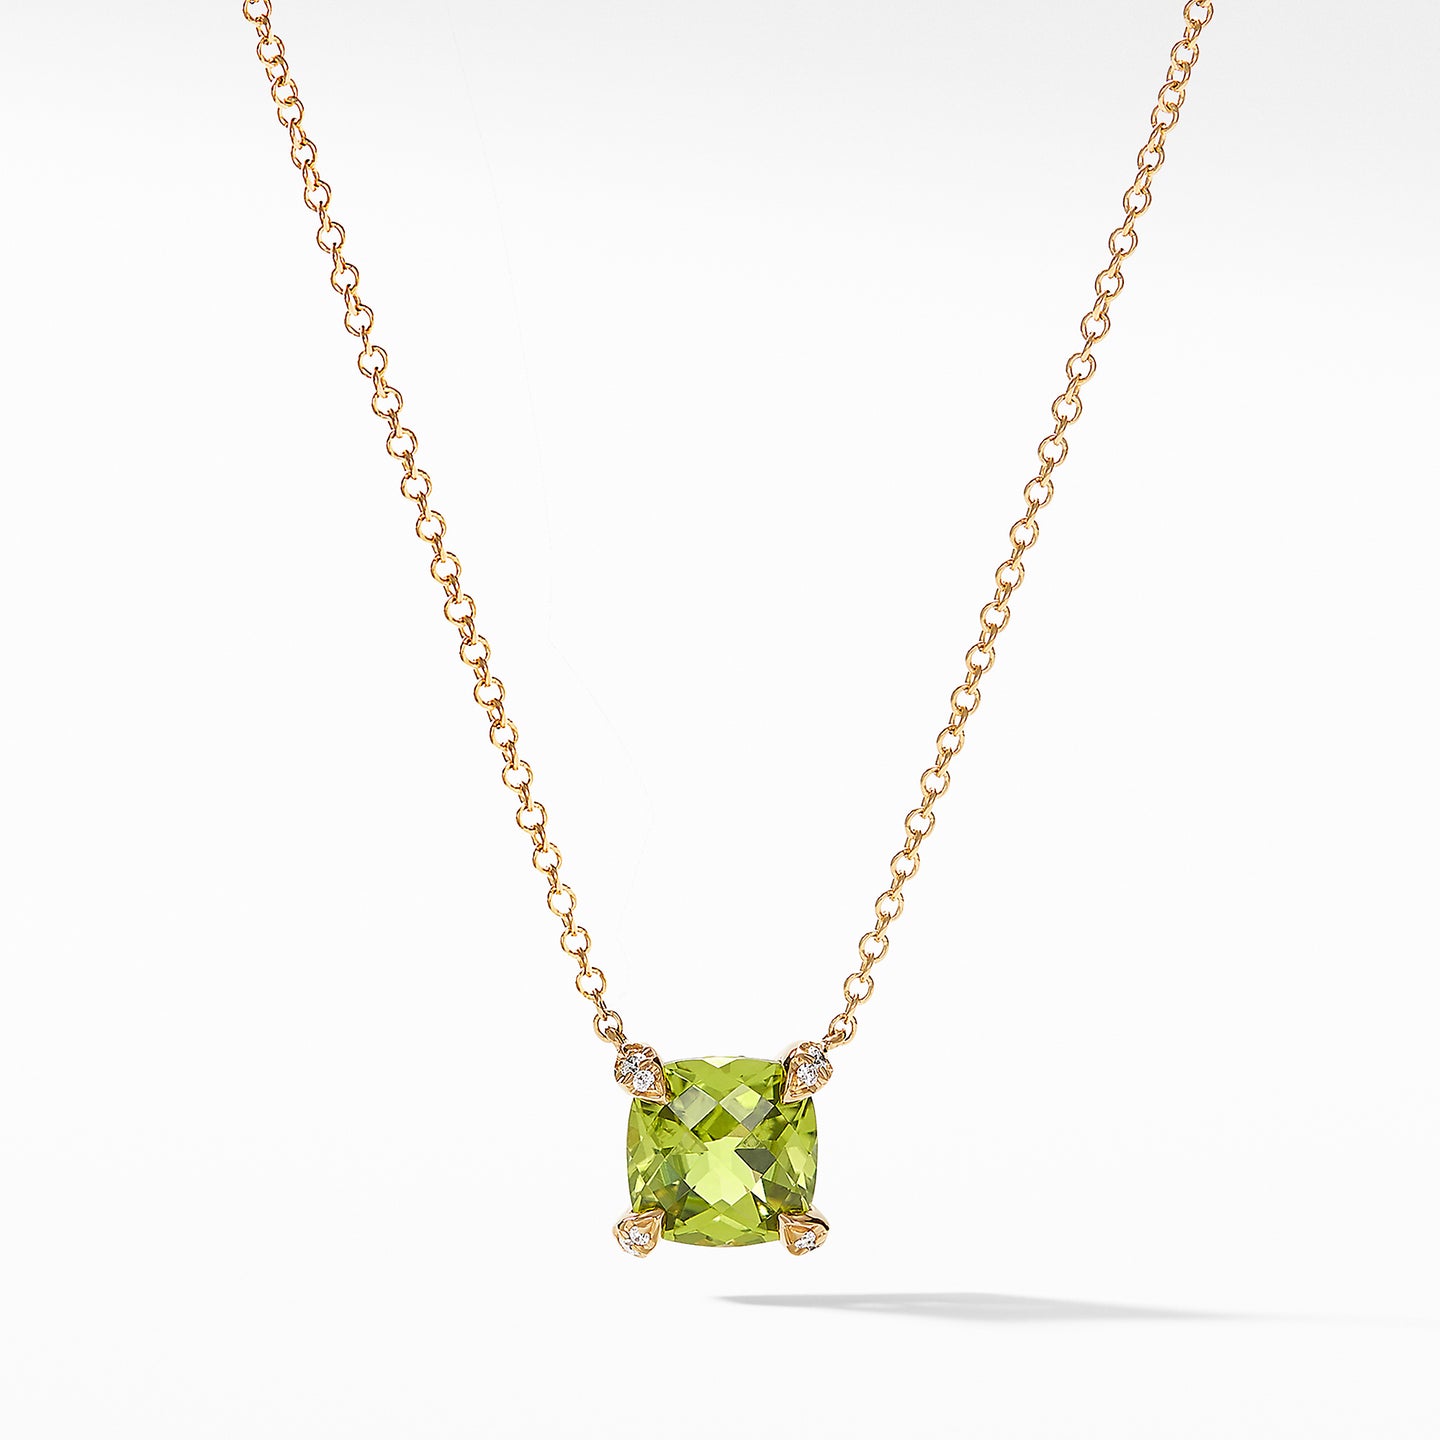 Pendant Necklace with Peridot and Diamonds in 18K Gold, 18